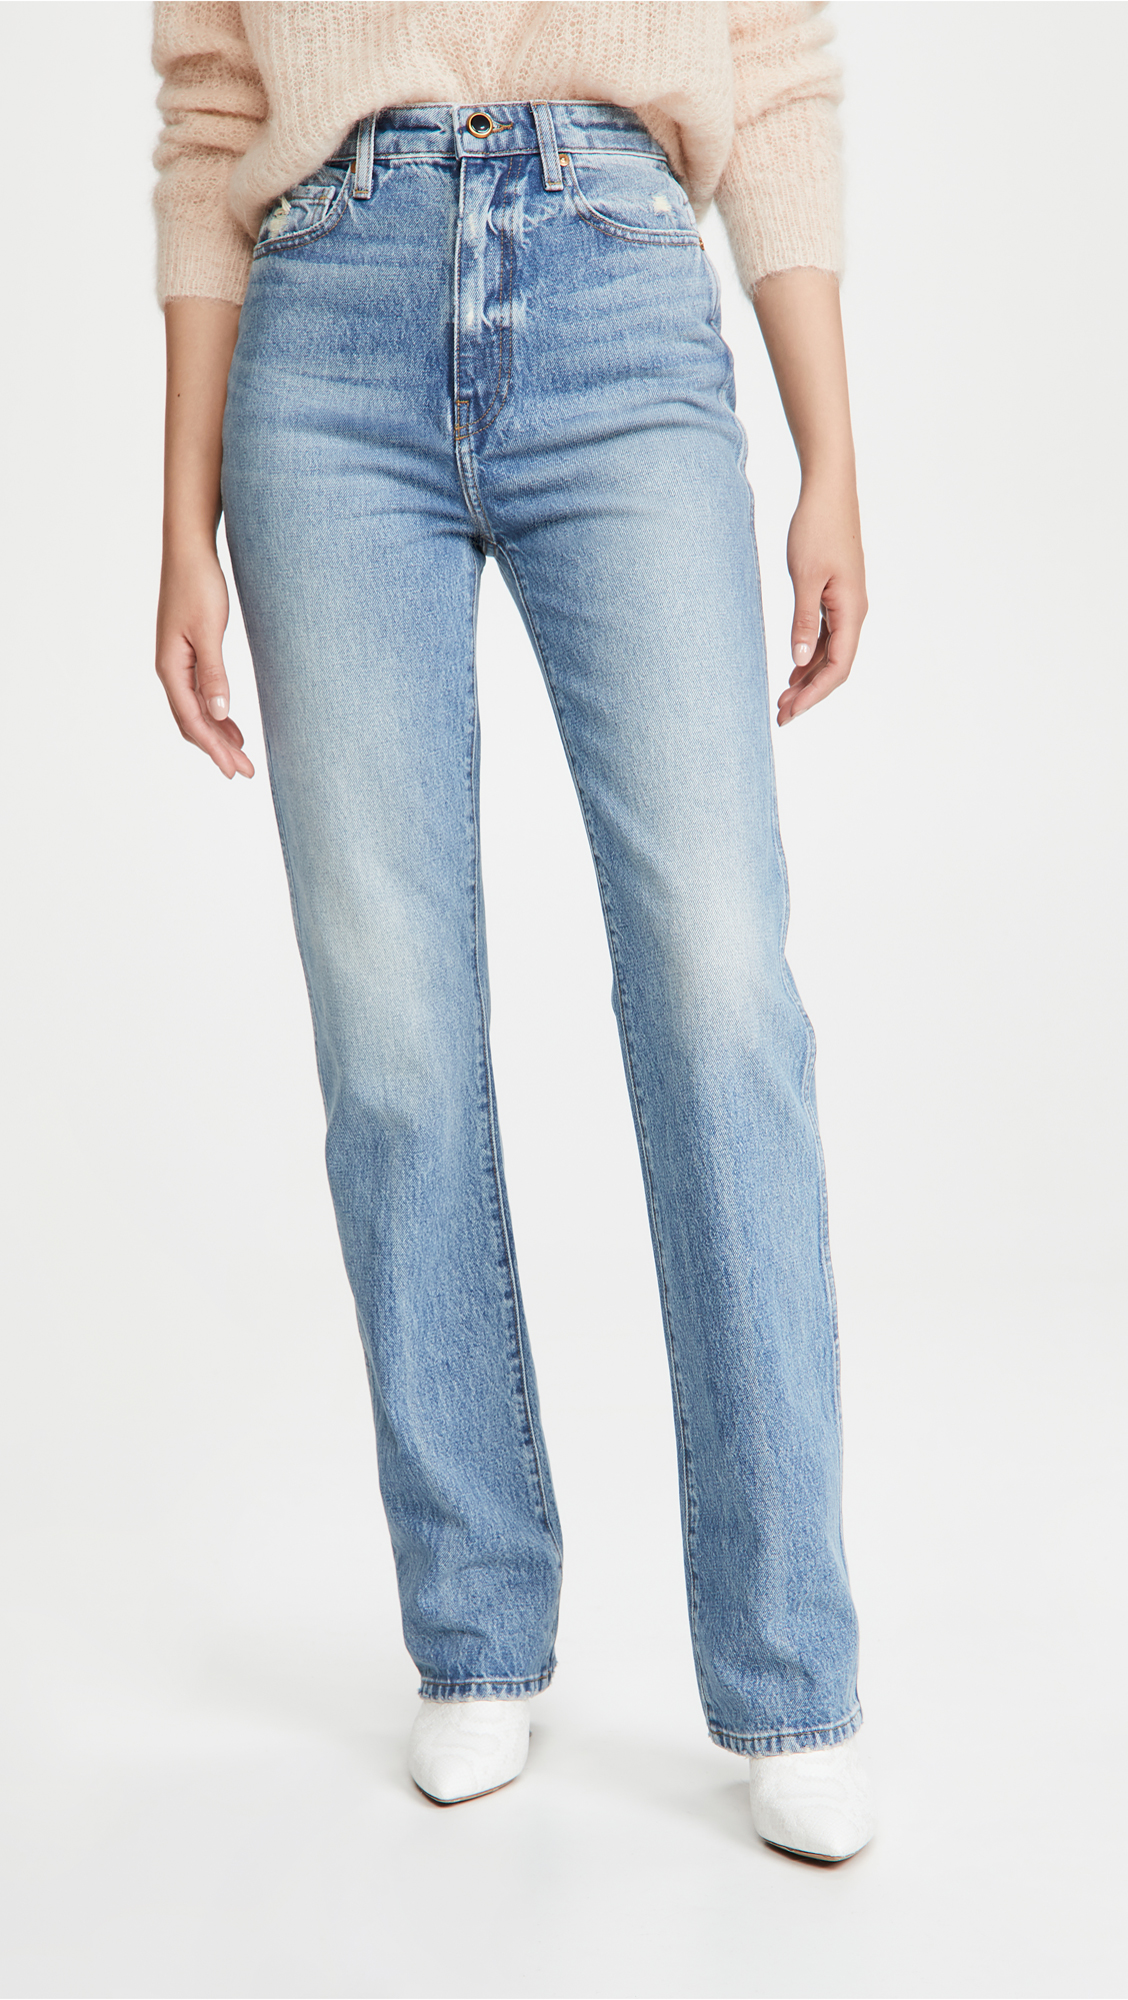 7 of the Best Pairs of Blue Jeans for Women | Who What Wear